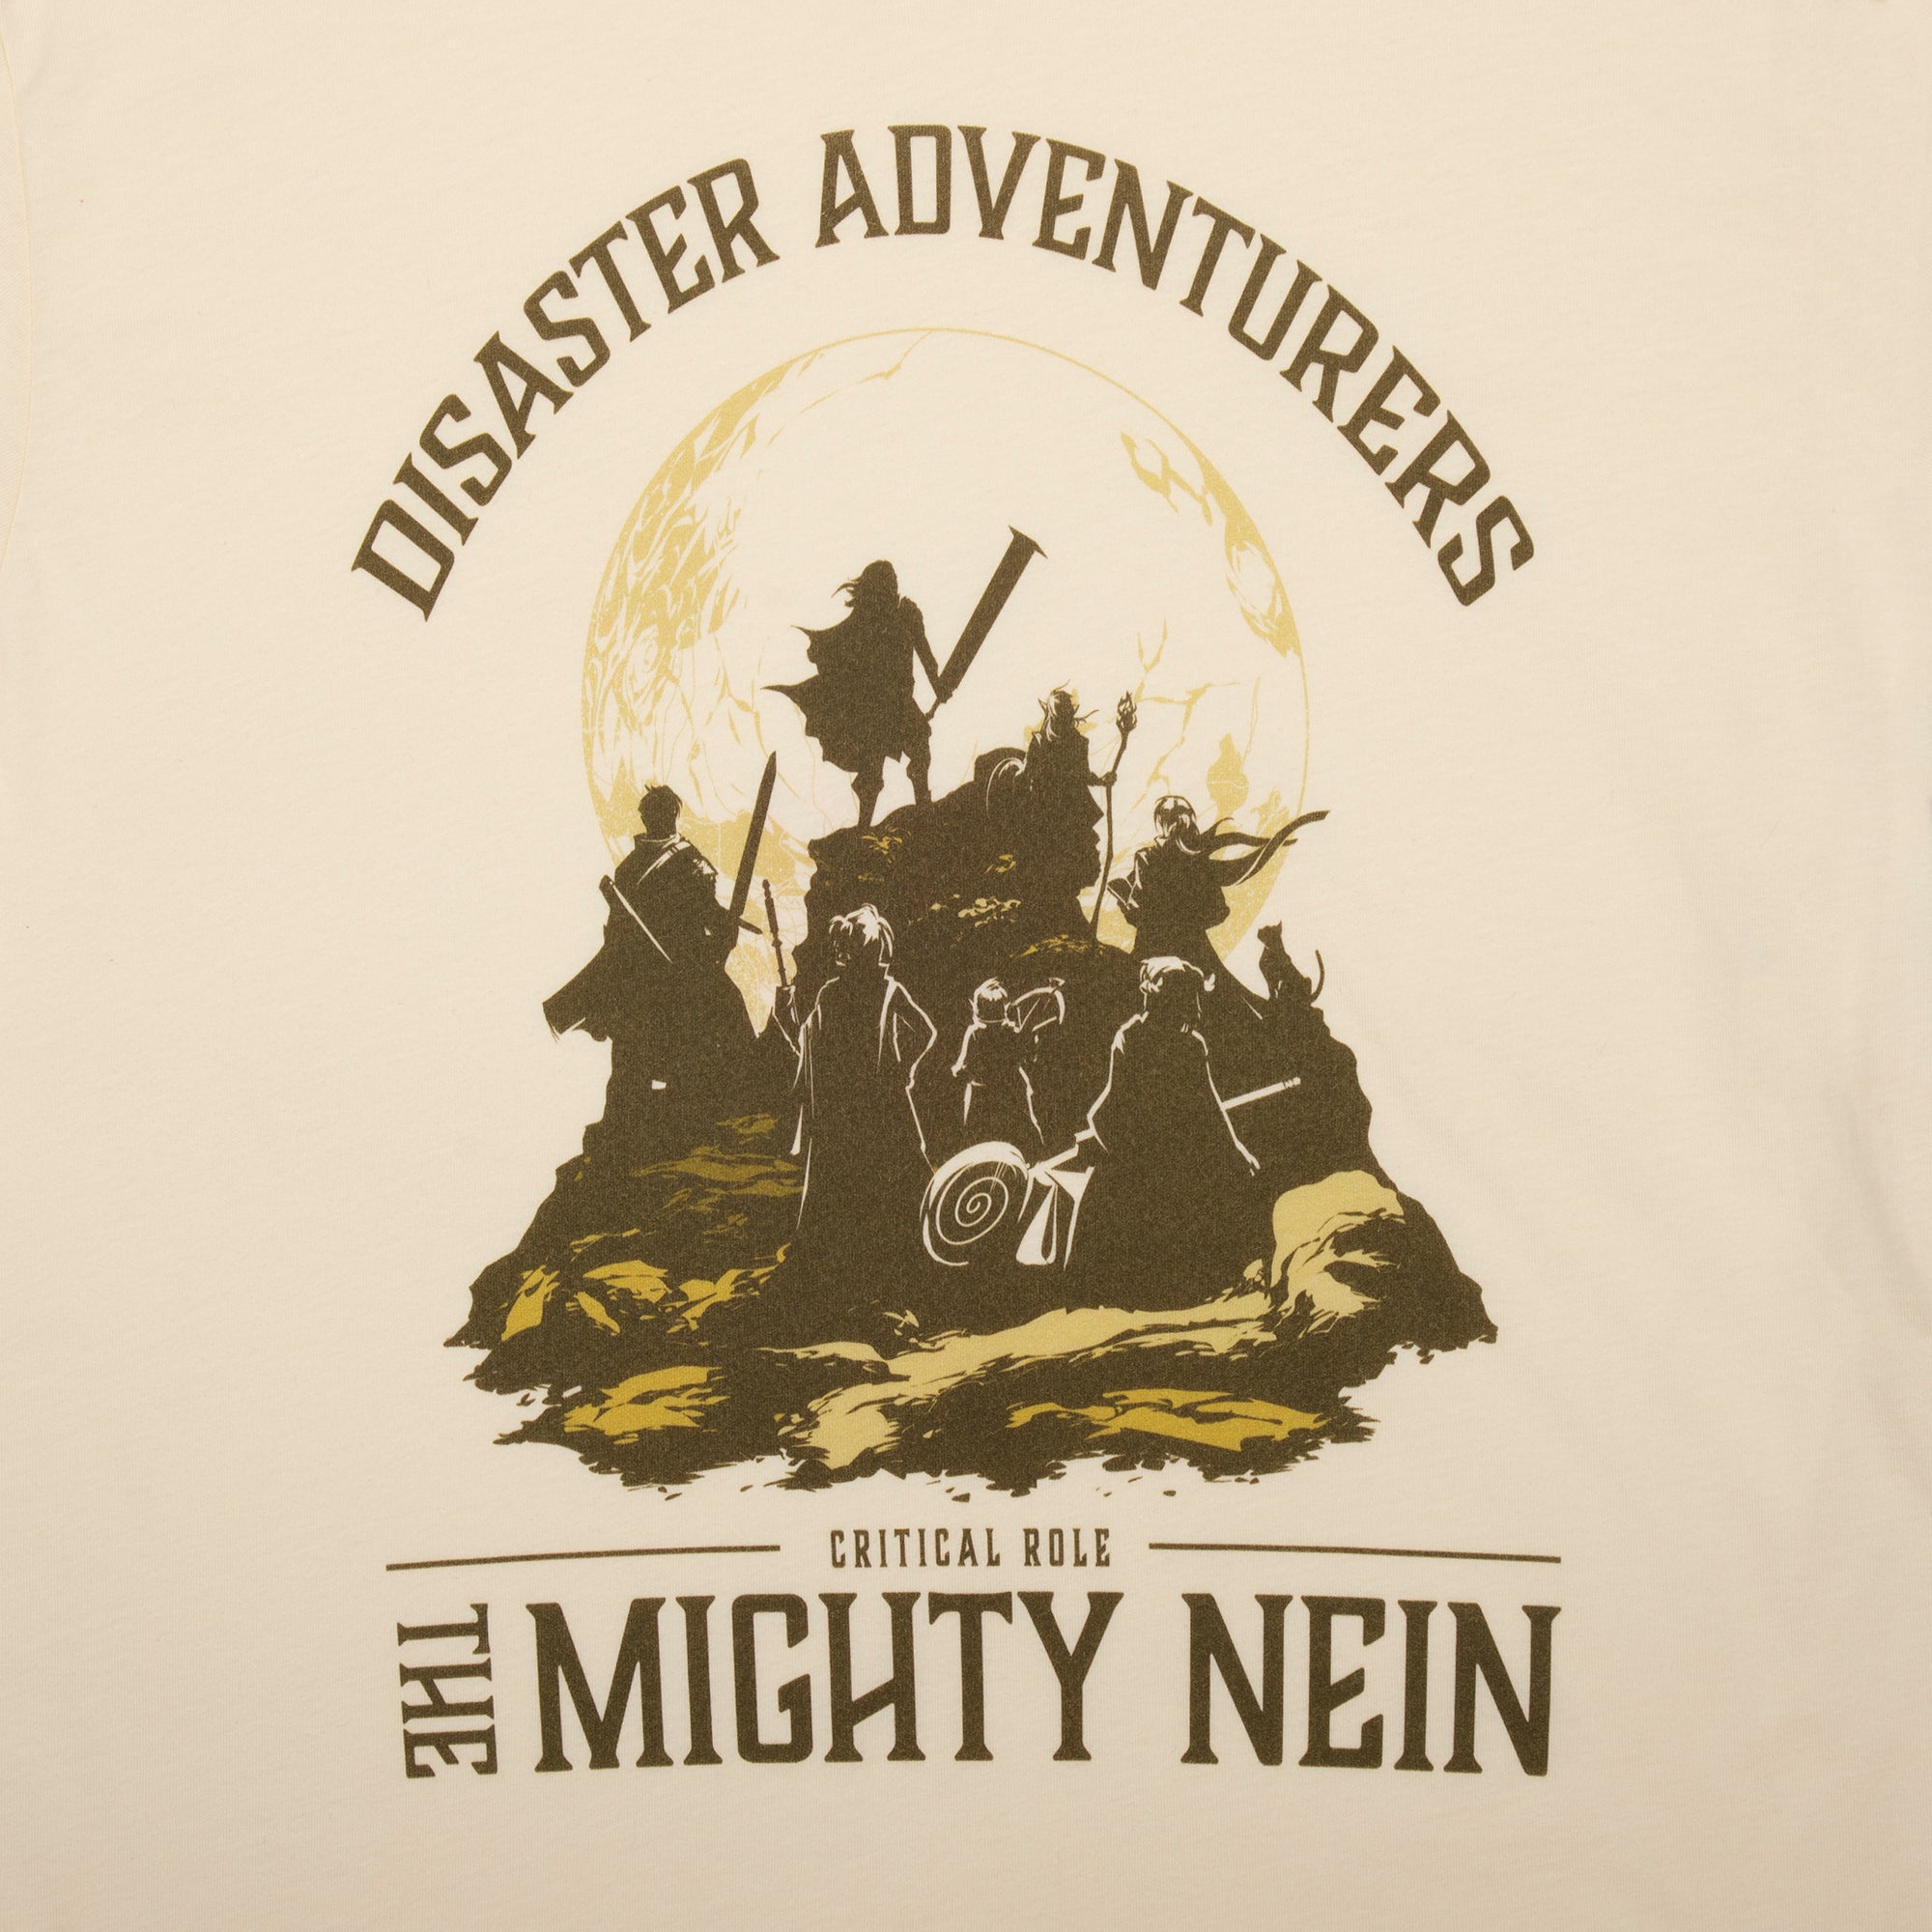 Mighty Nein Disaster Adventurers Natural Tee